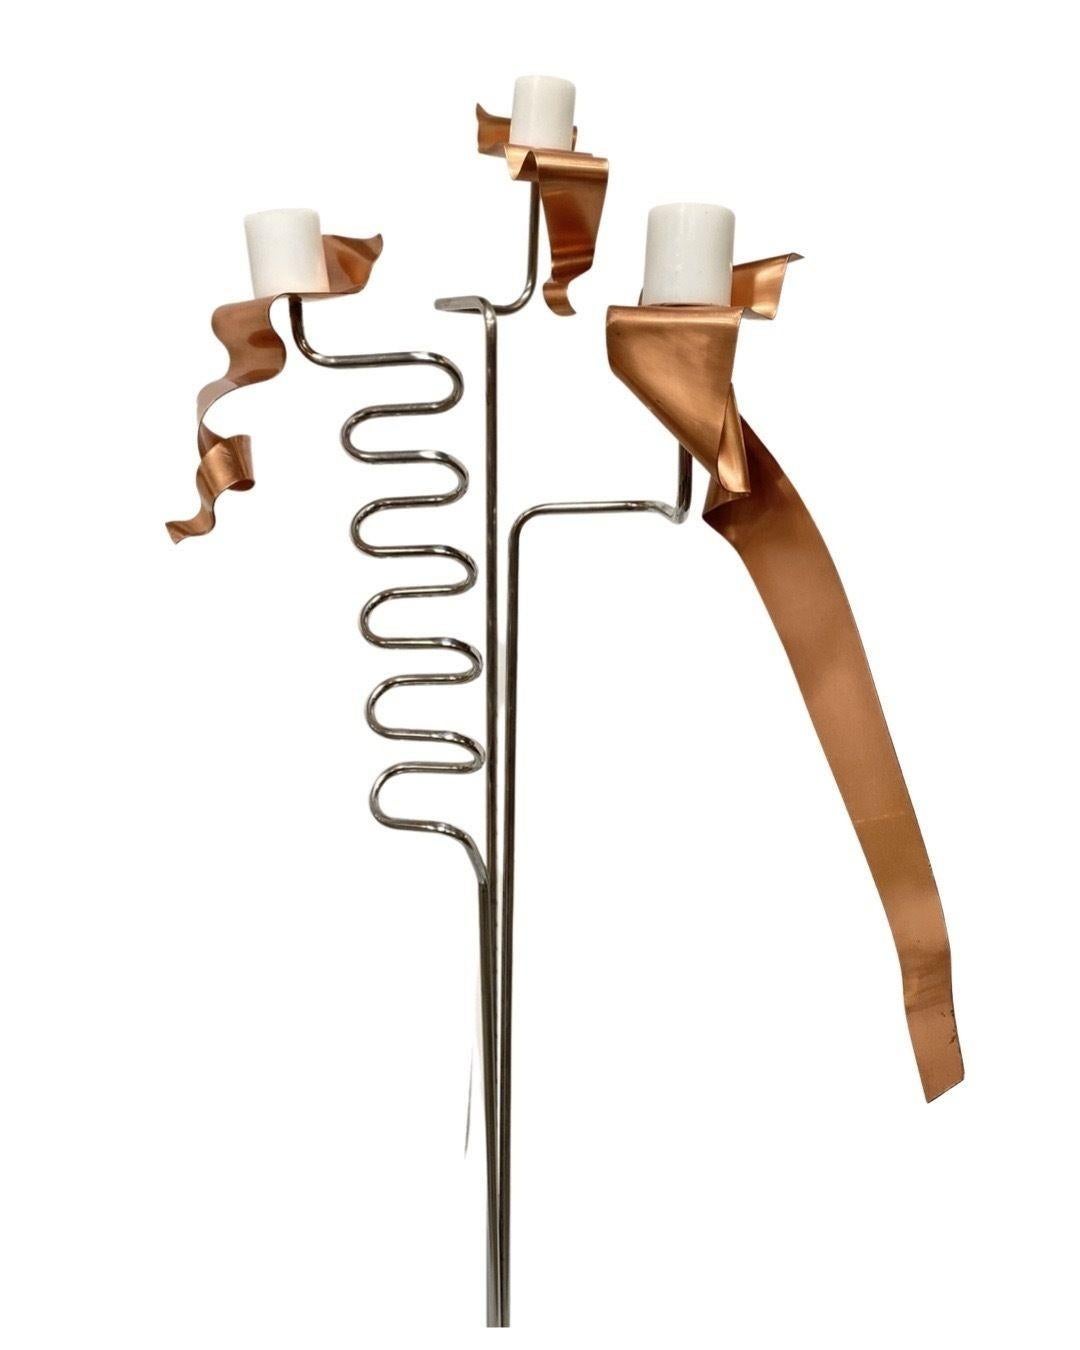 Machine Chrome & Copper 3 Arm Artist Signed Abstract Sculptural Candelabra For Sale 2